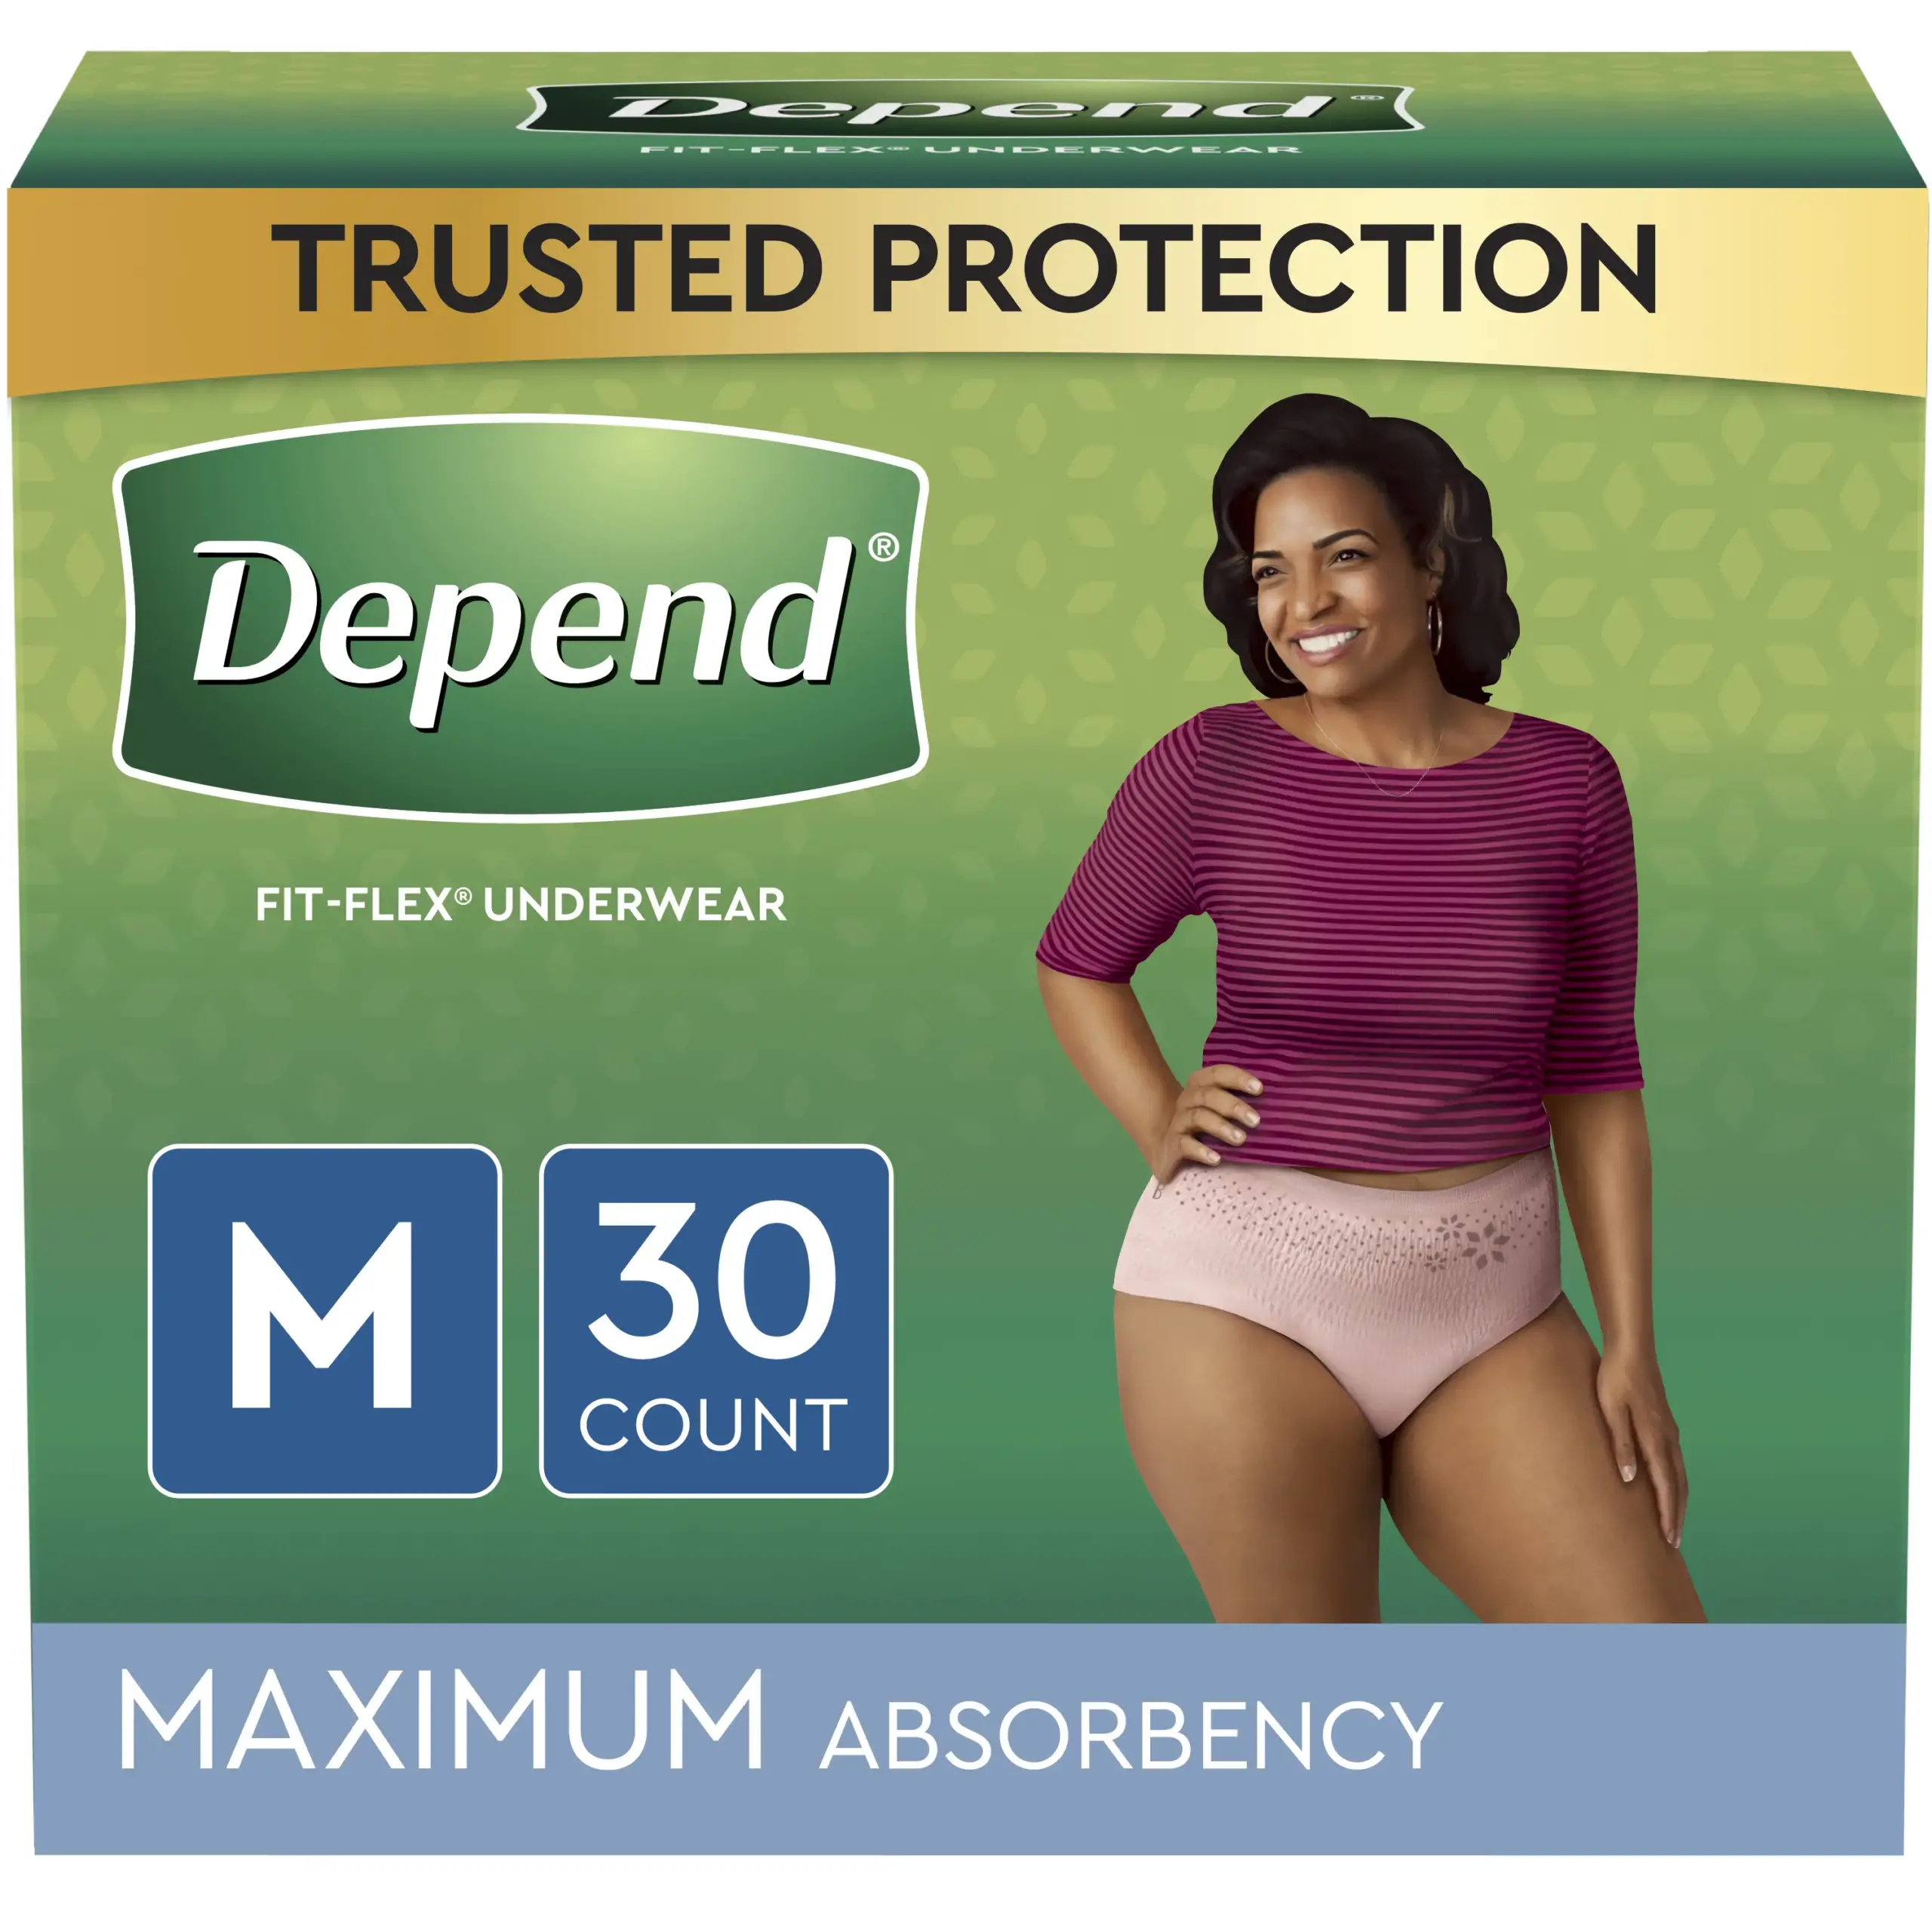 Depend FIT-FLEX Incontinence Underwear for Women, Maximum Absorbency, Medium, Blush, 30 Count, Replaces Item 6947919